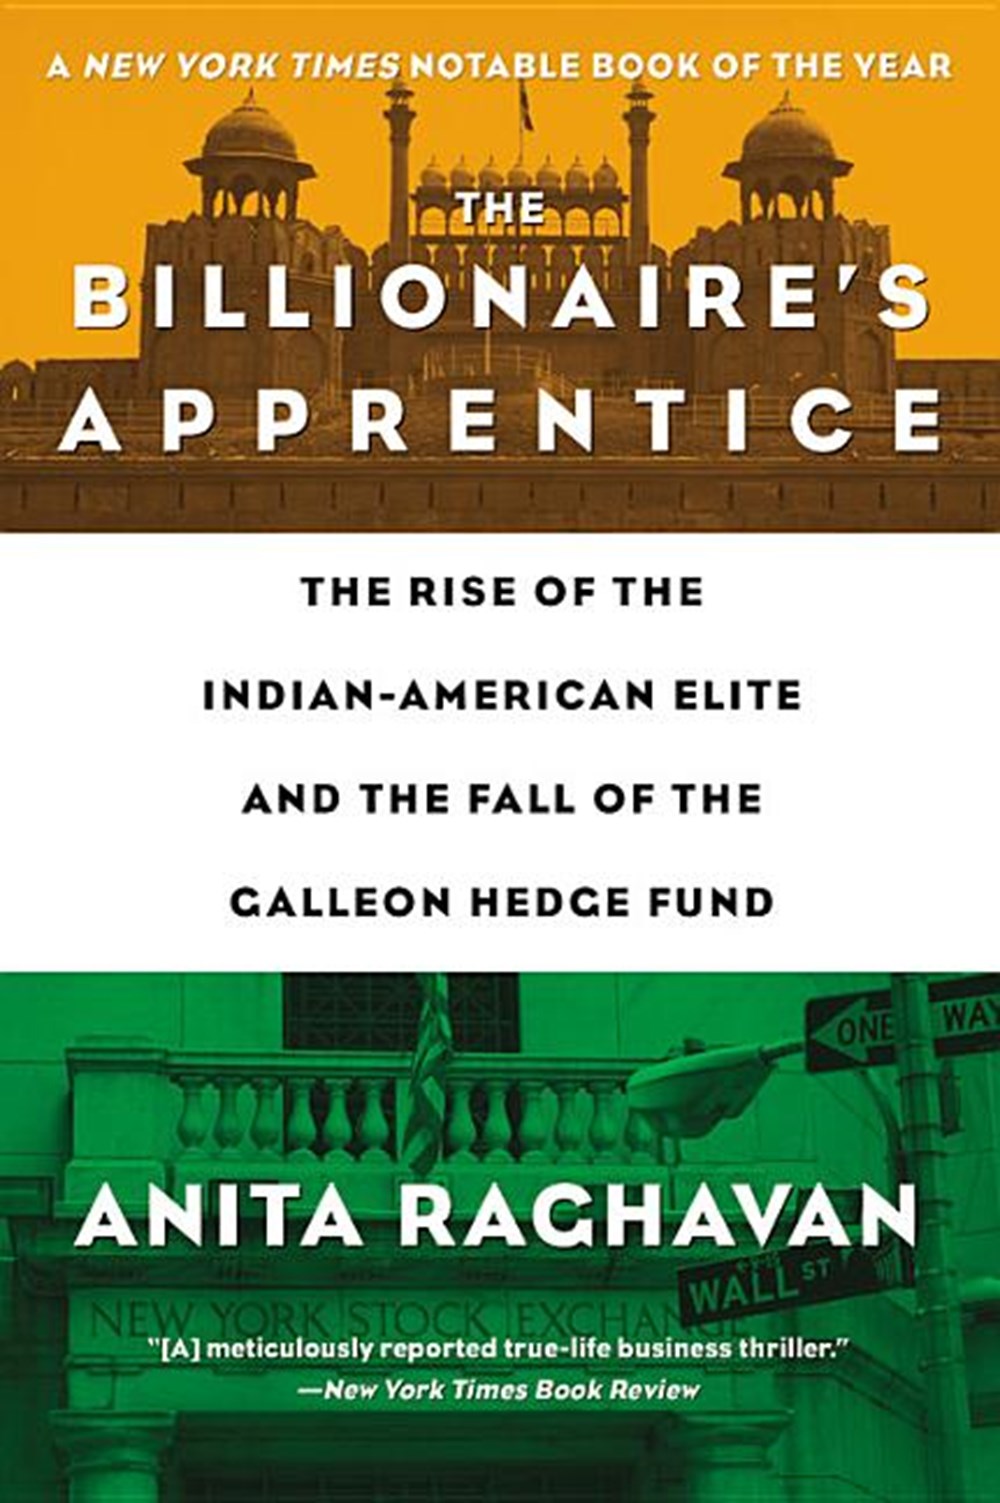 Billionaire's Apprentice The Rise of the Indian-American Elite and the Fall of the Galleon Hedge Fun